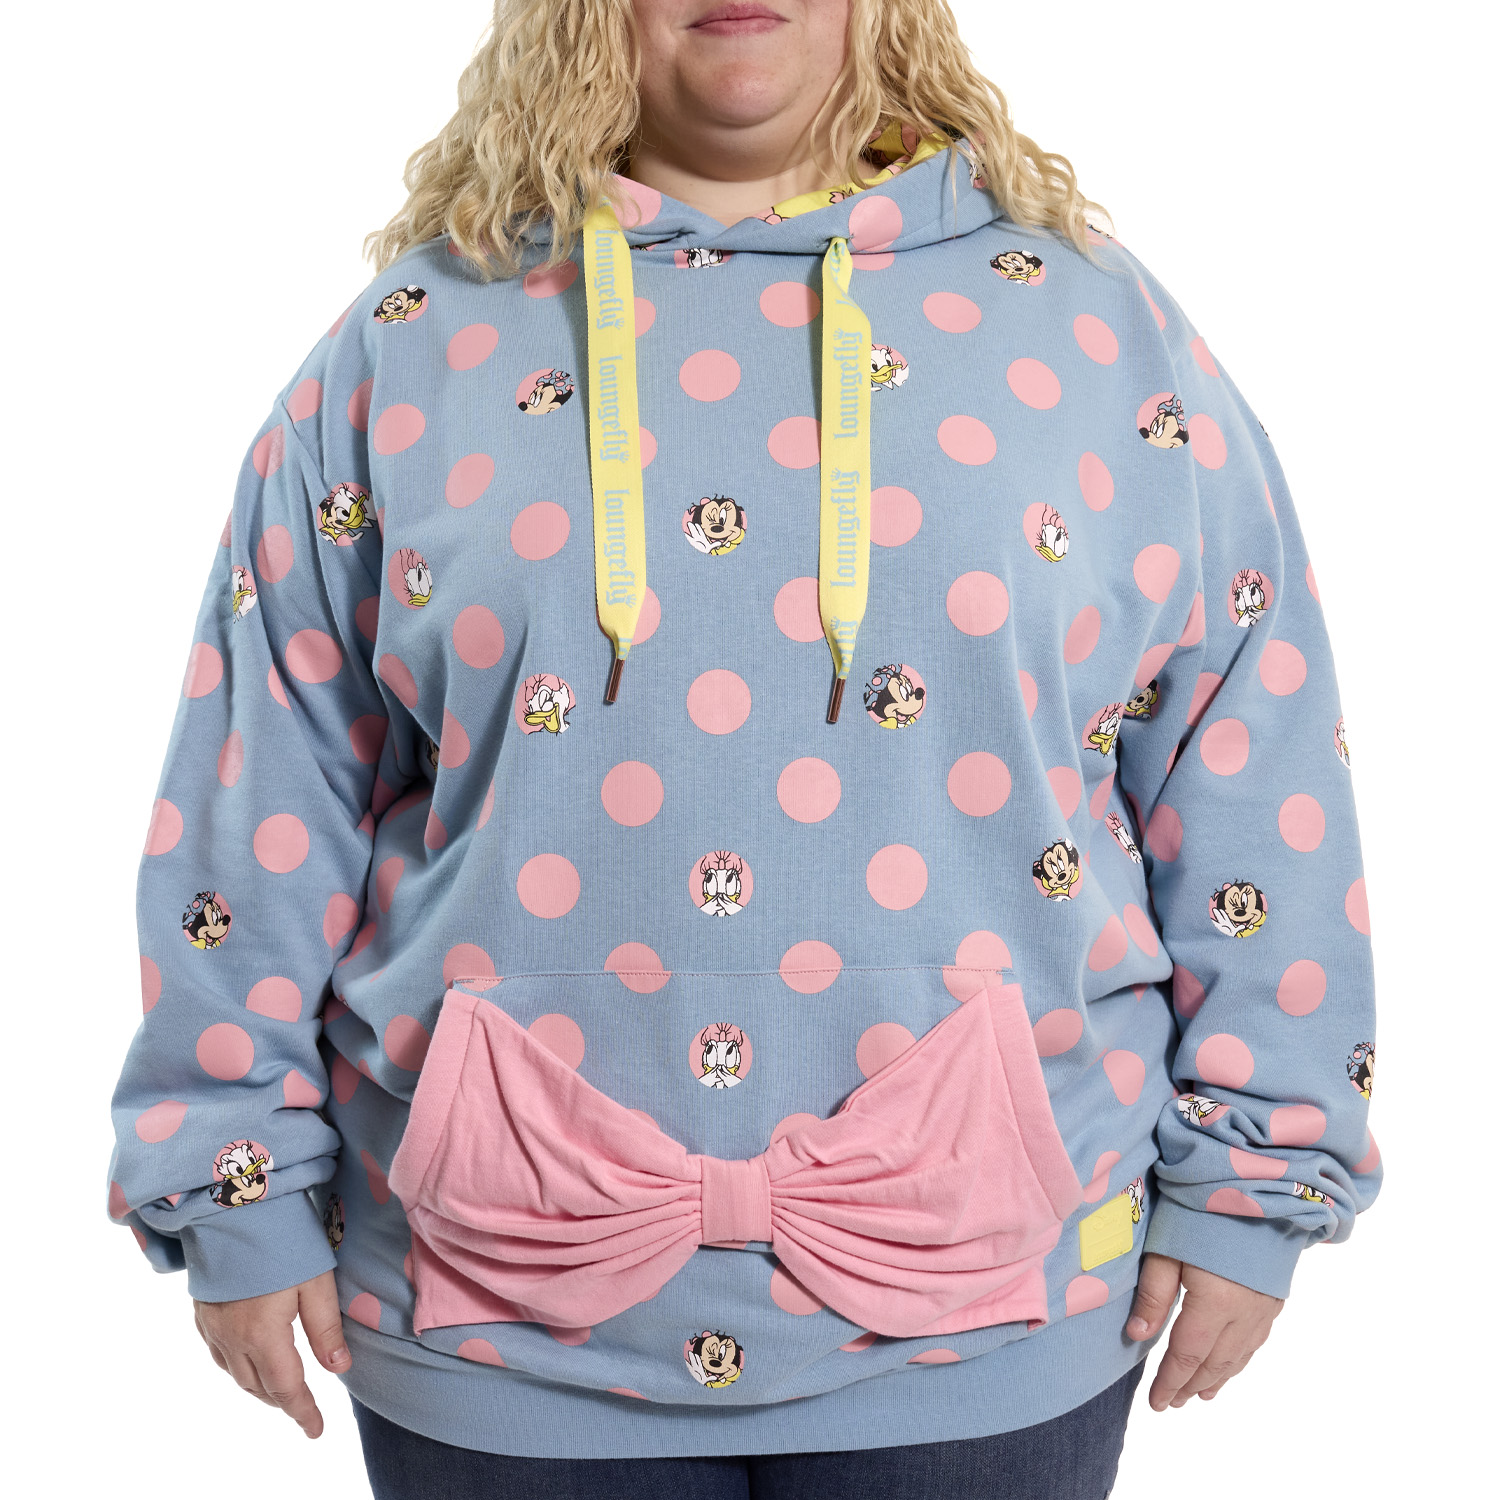 Louis Vuitton With Minnie Mouse Hoodie - Tagotee